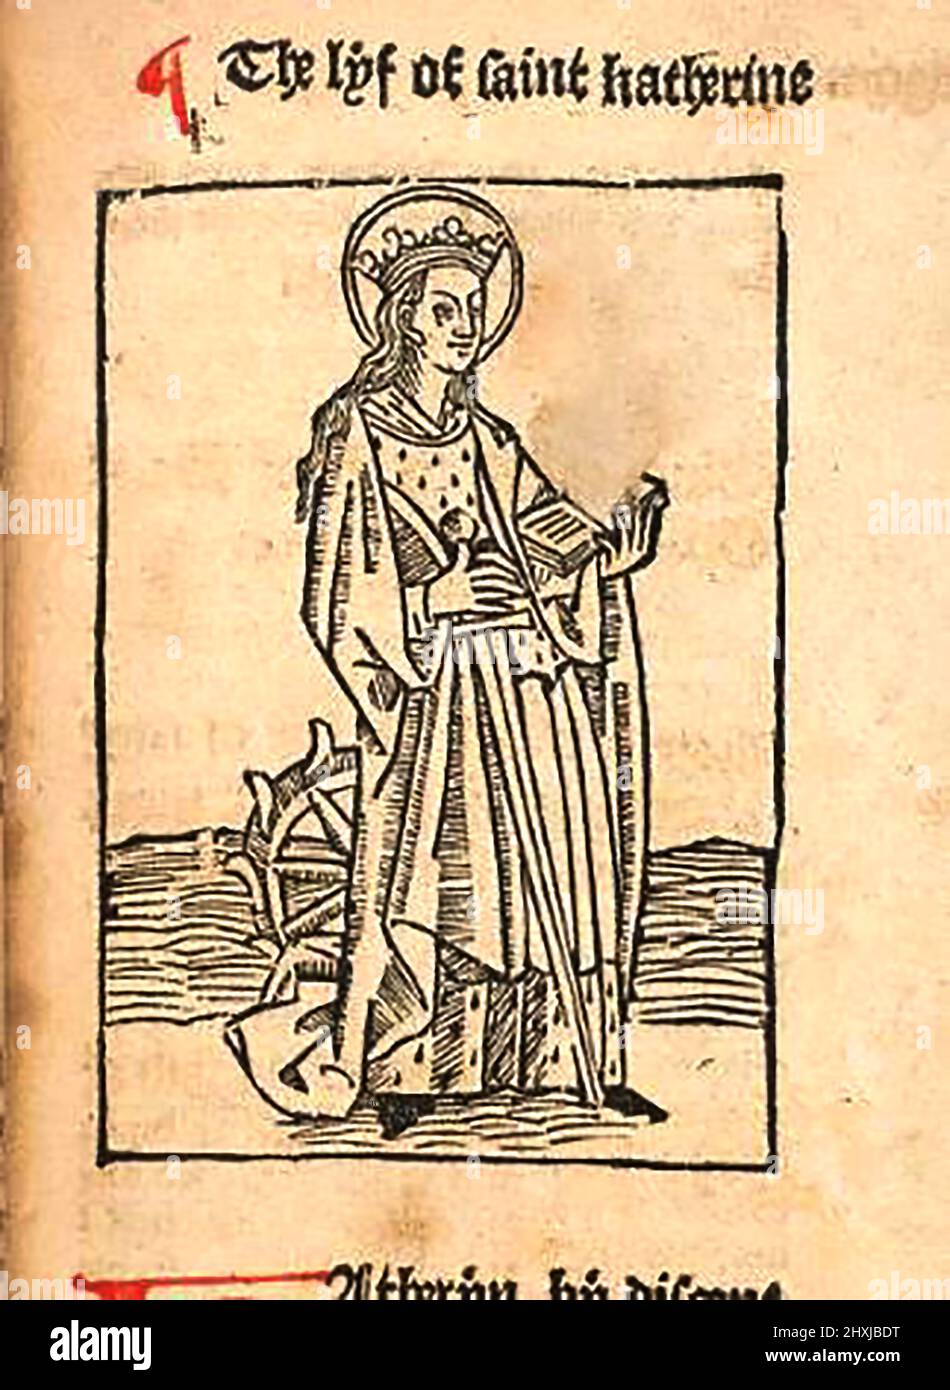 15th century woodcut showing St Katheryn / Catherine or Katherine , as printed by William Caxton ( 1422-1491/92) in his translation of  'The Golden Legend' or  'Thus endeth the legende named in Latyn legenda aurea that is to saye in Englysshe the golden legende' by Jacobus, de Voragine, (Circa 1229-1298). Stock Photo